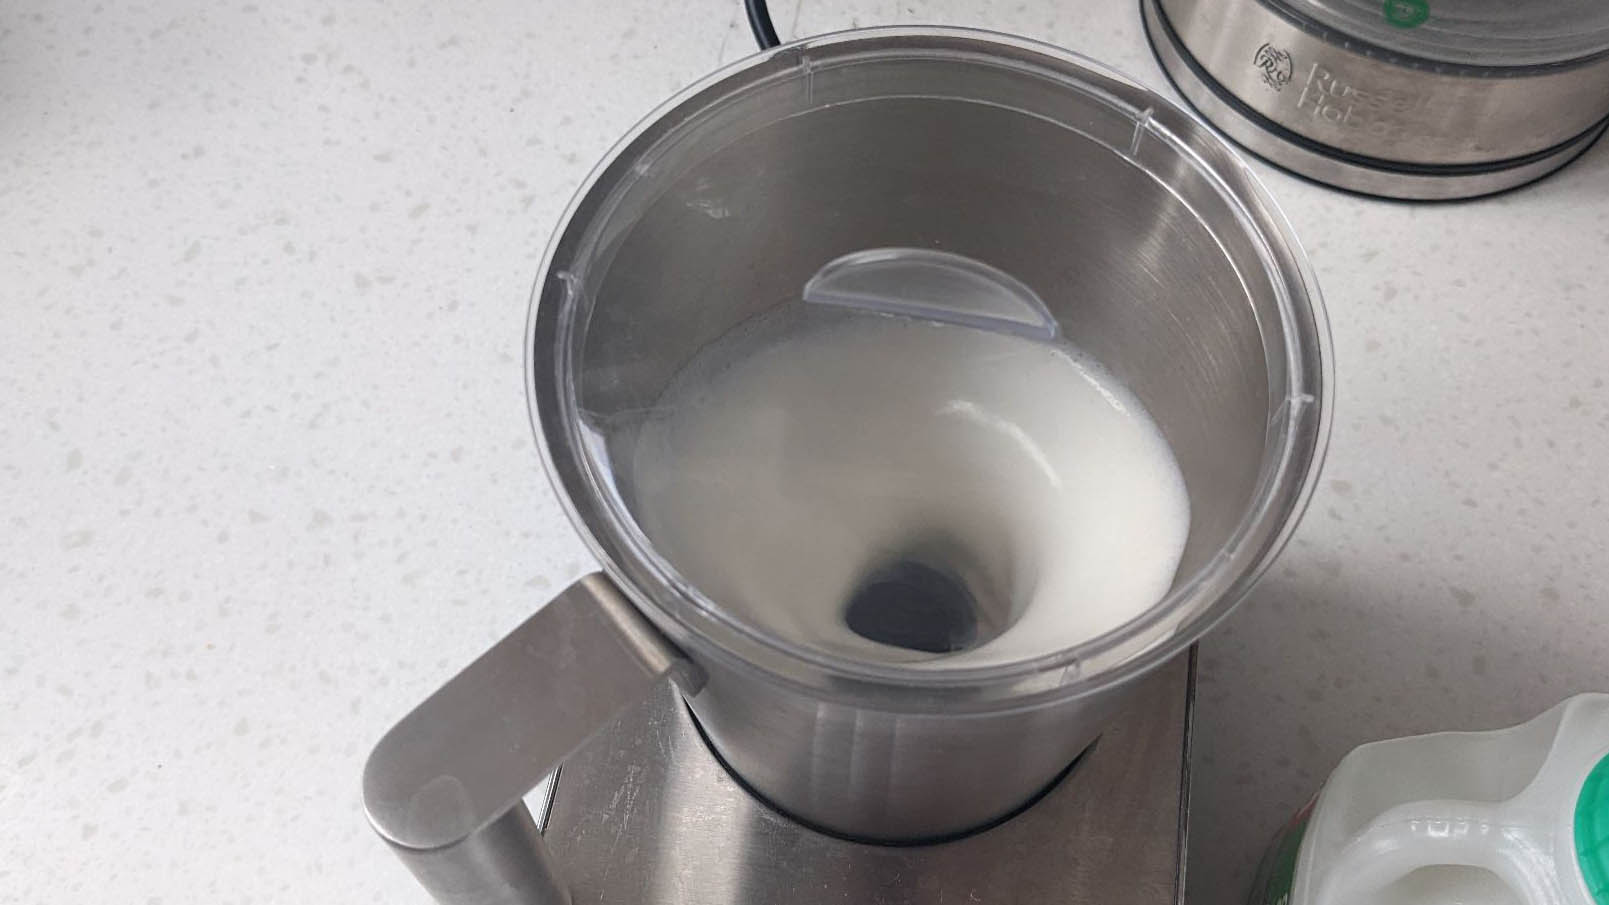 Milk in frother